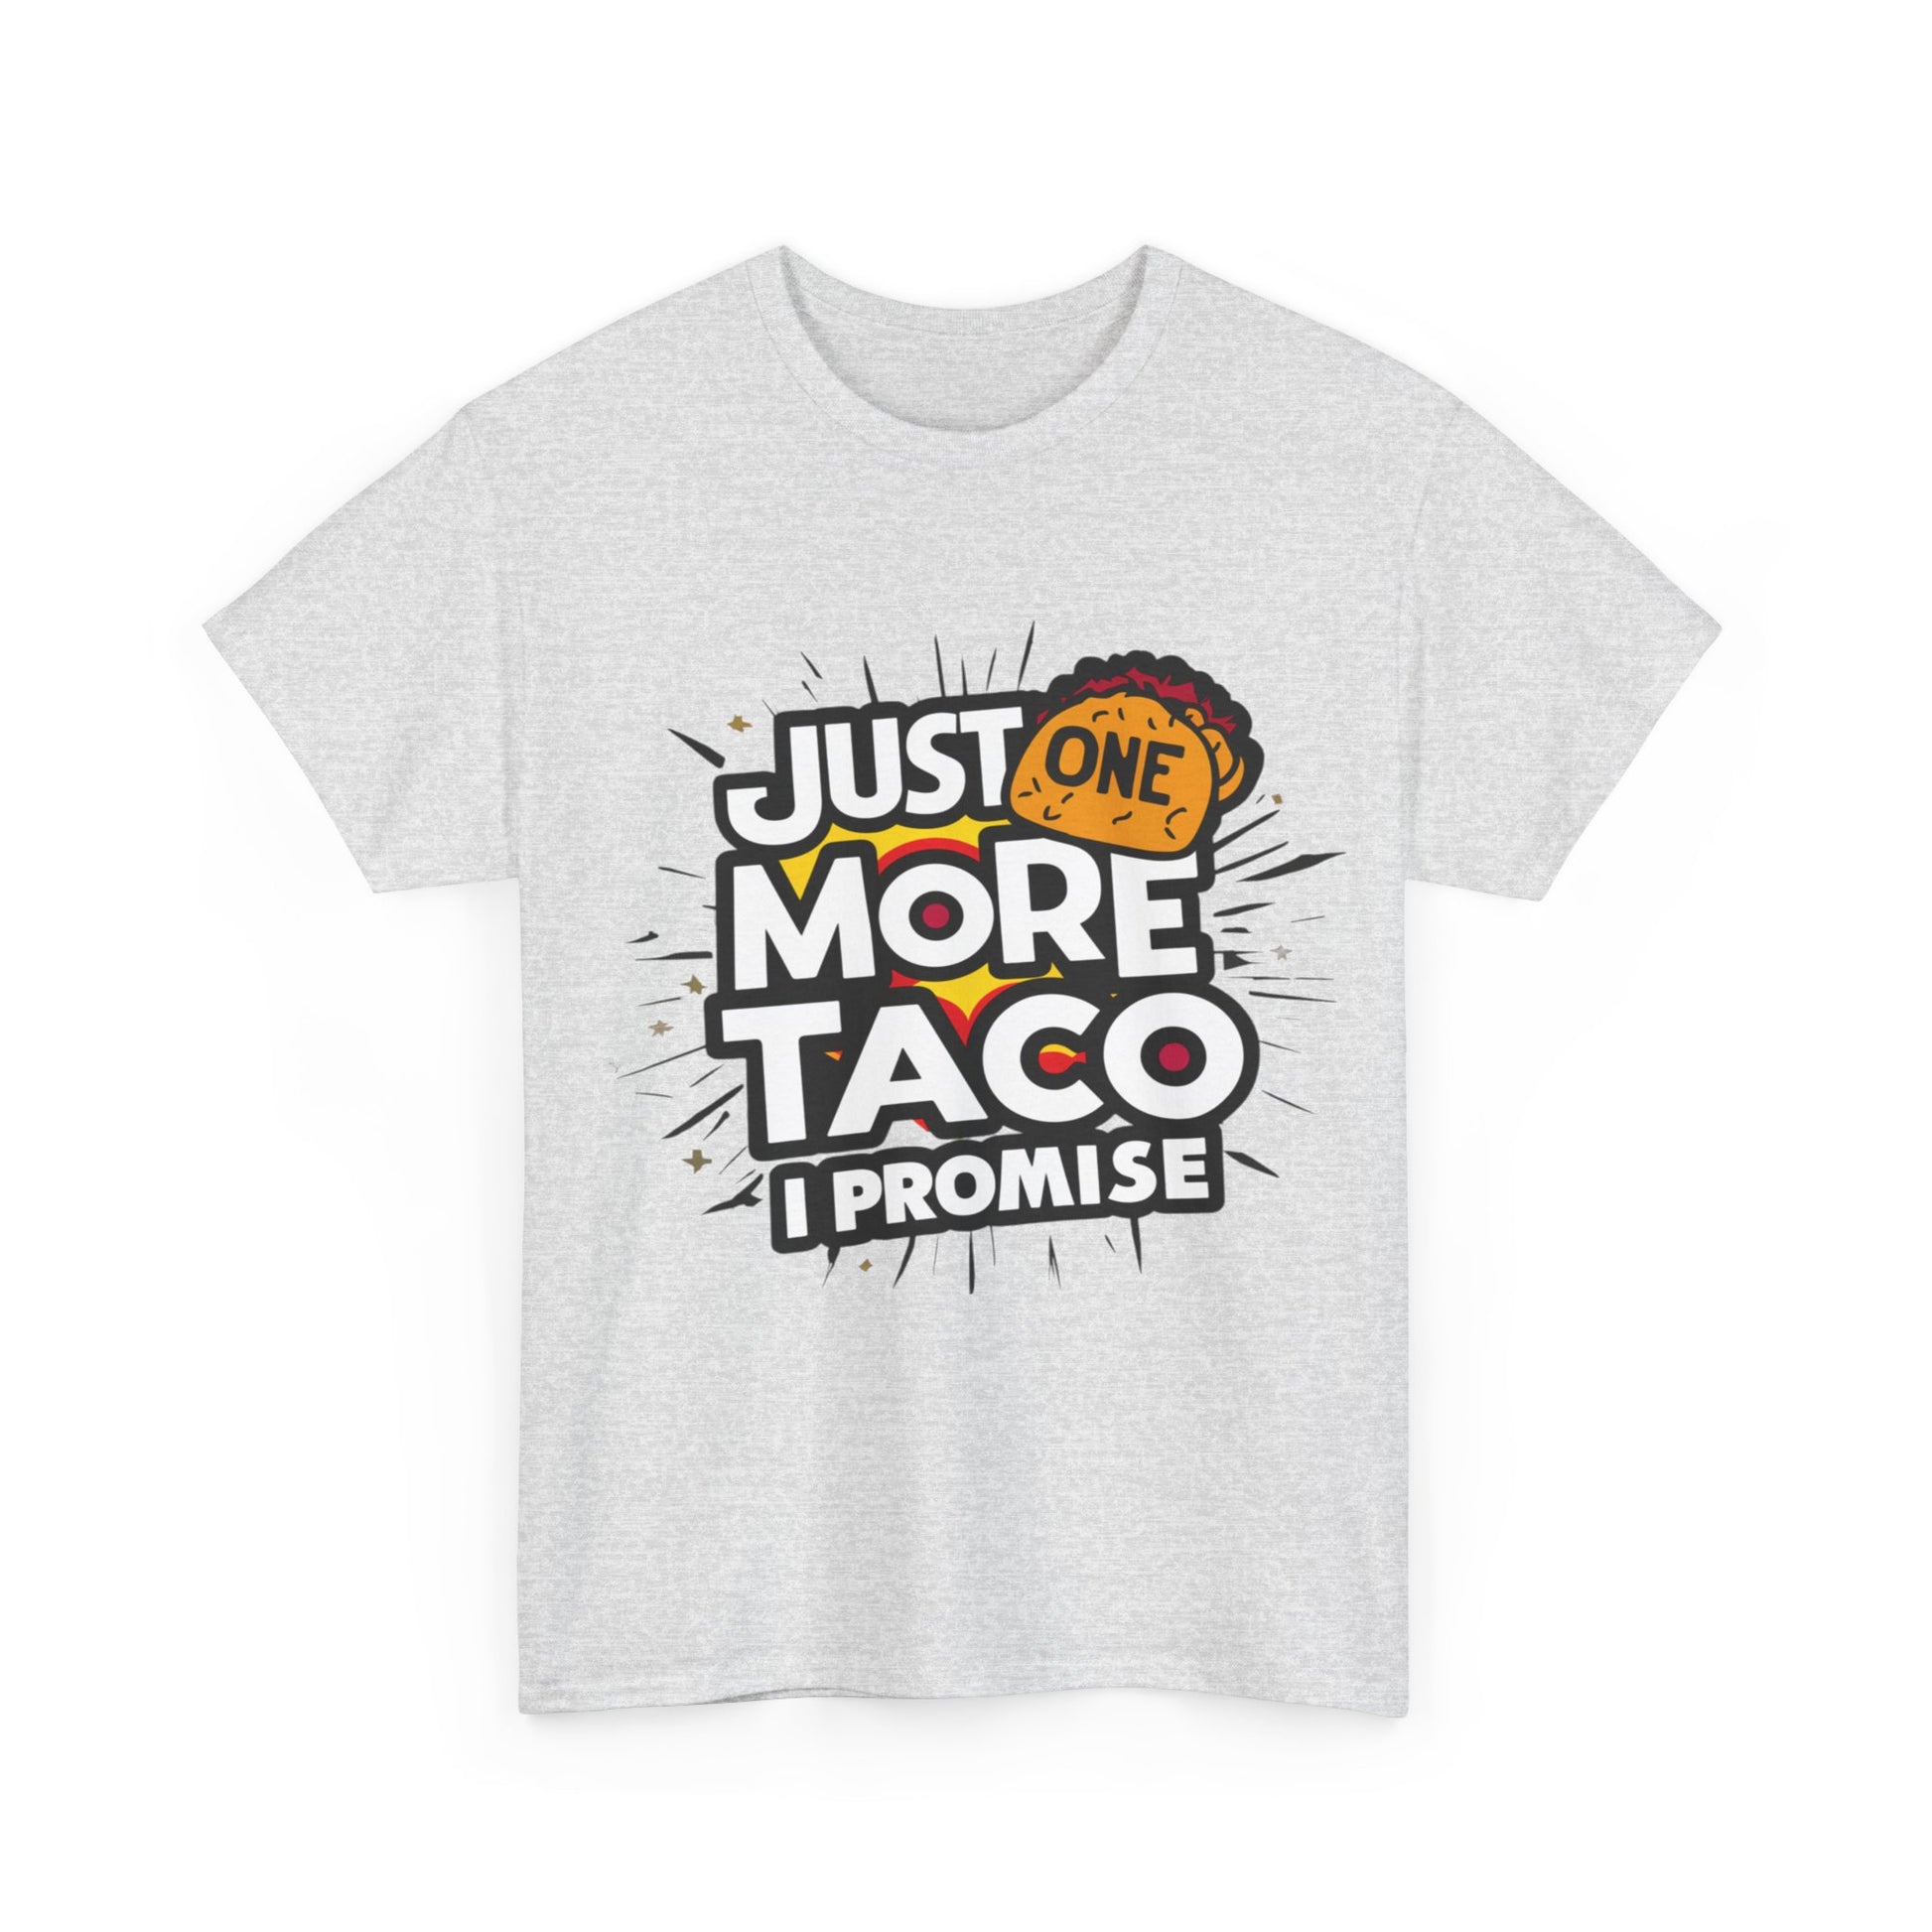 Copy of Just One More Taco I Promise Mexican Food Graphic Unisex Heavy Cotton Tee Cotton Funny Humorous Graphic Soft Premium Unisex Men Women Ash T-shirt Birthday Gift-51